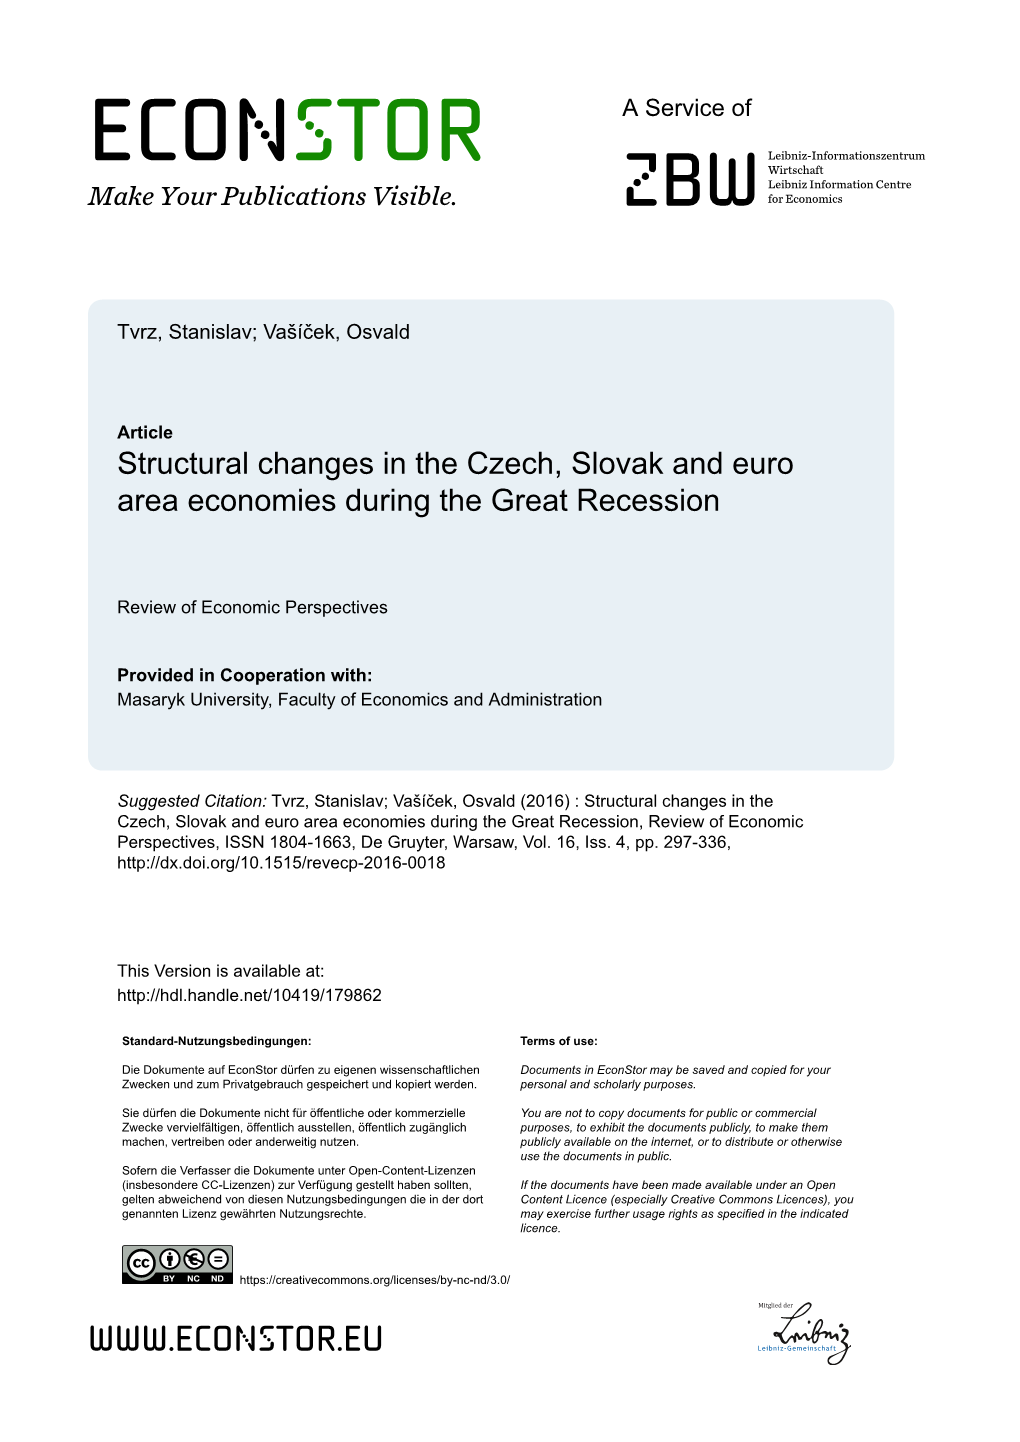 Structural Changes in the Czech, Slovak and Euro Area Economies During the Great Recession